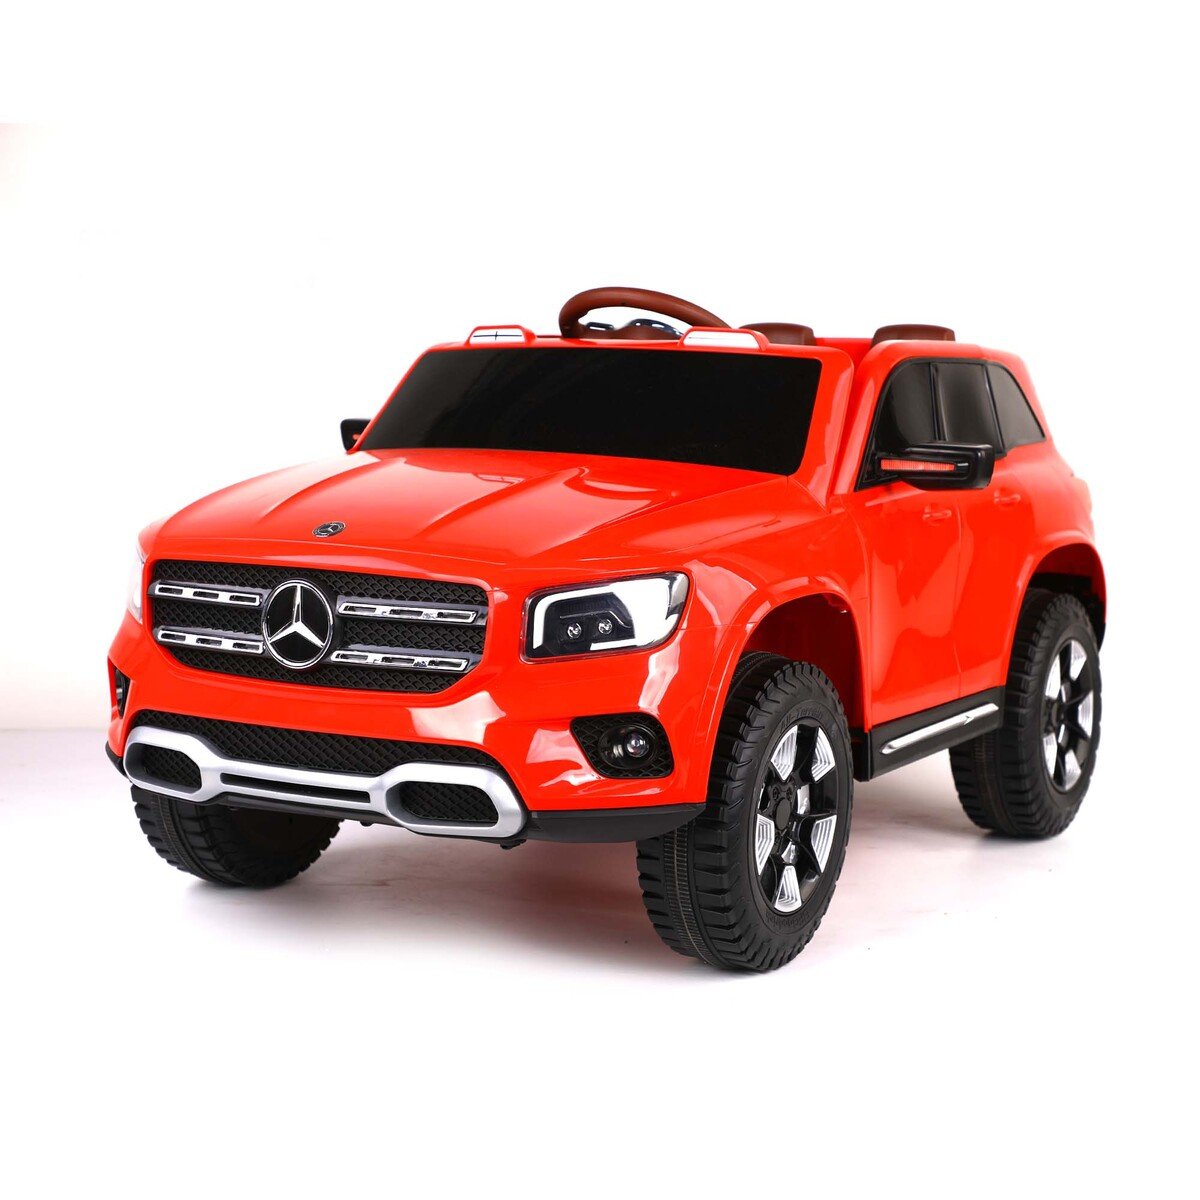 Skid Fusion Kids Battery Operated Motor Car 1201BENZ Red